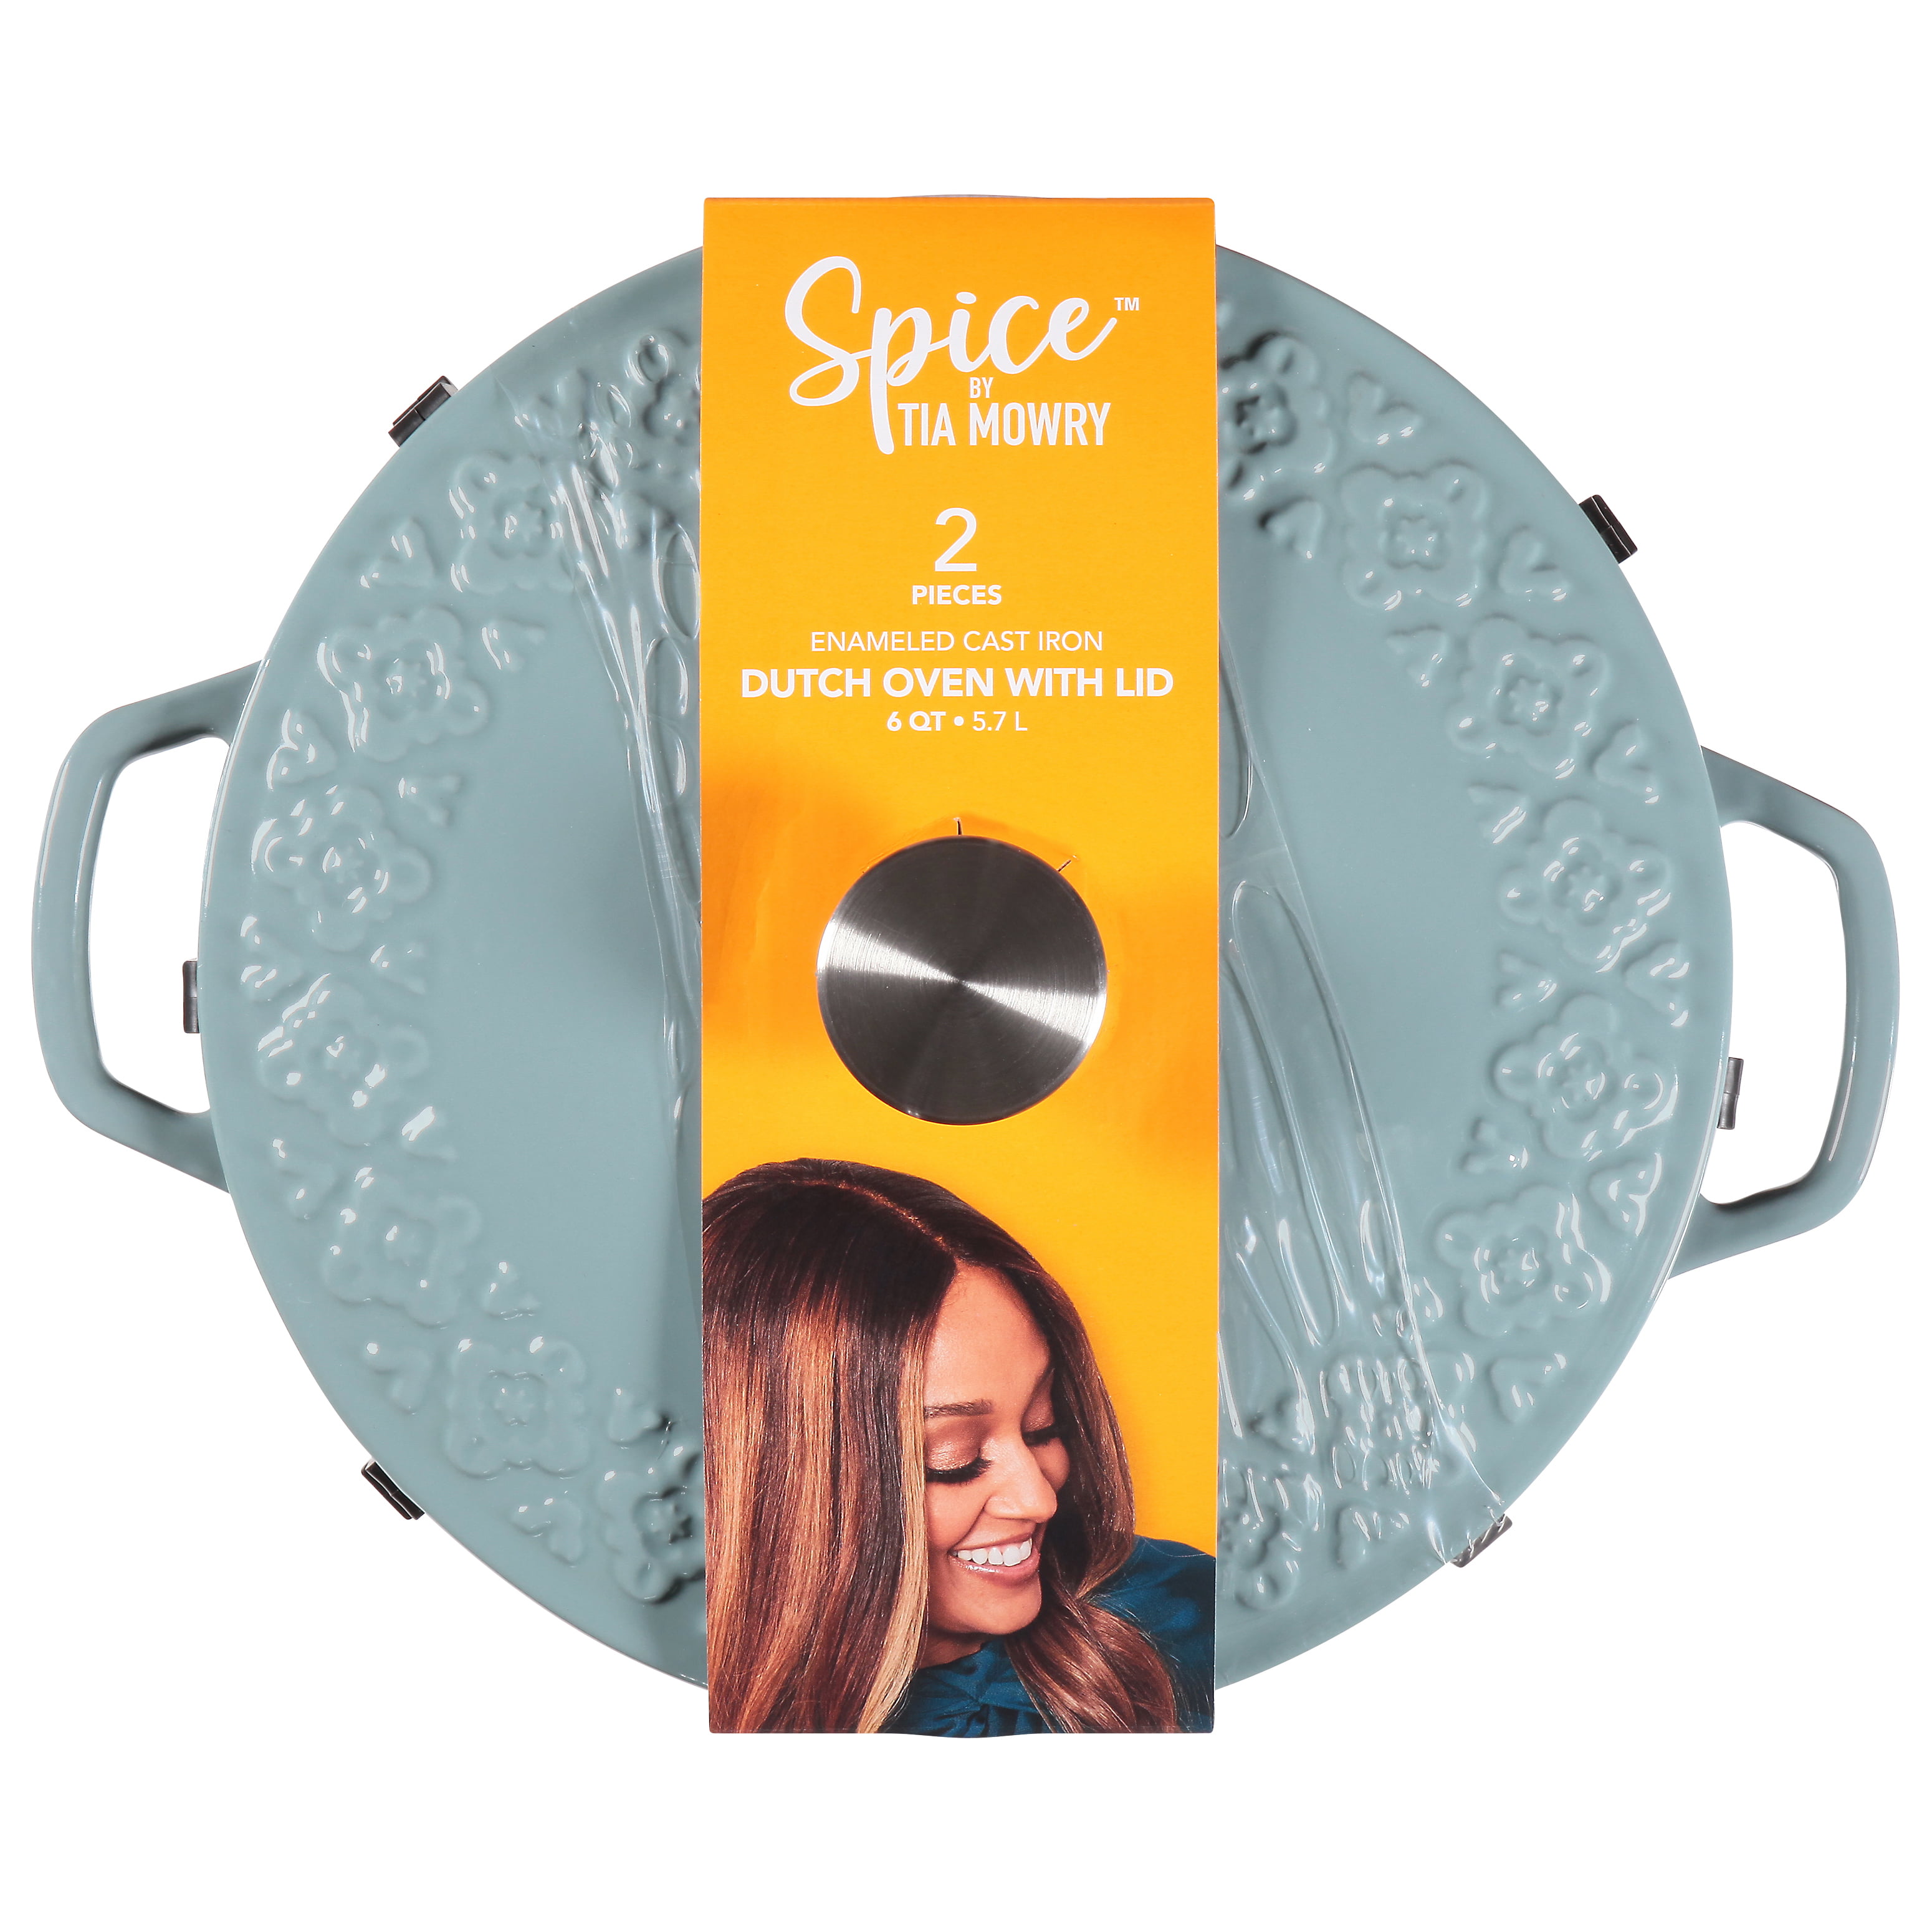  Spice by Tia Mowry Savory Saffron 6Qt Cast Iron Dutch Oven With  Embossed Lid - Grey: Home & Kitchen